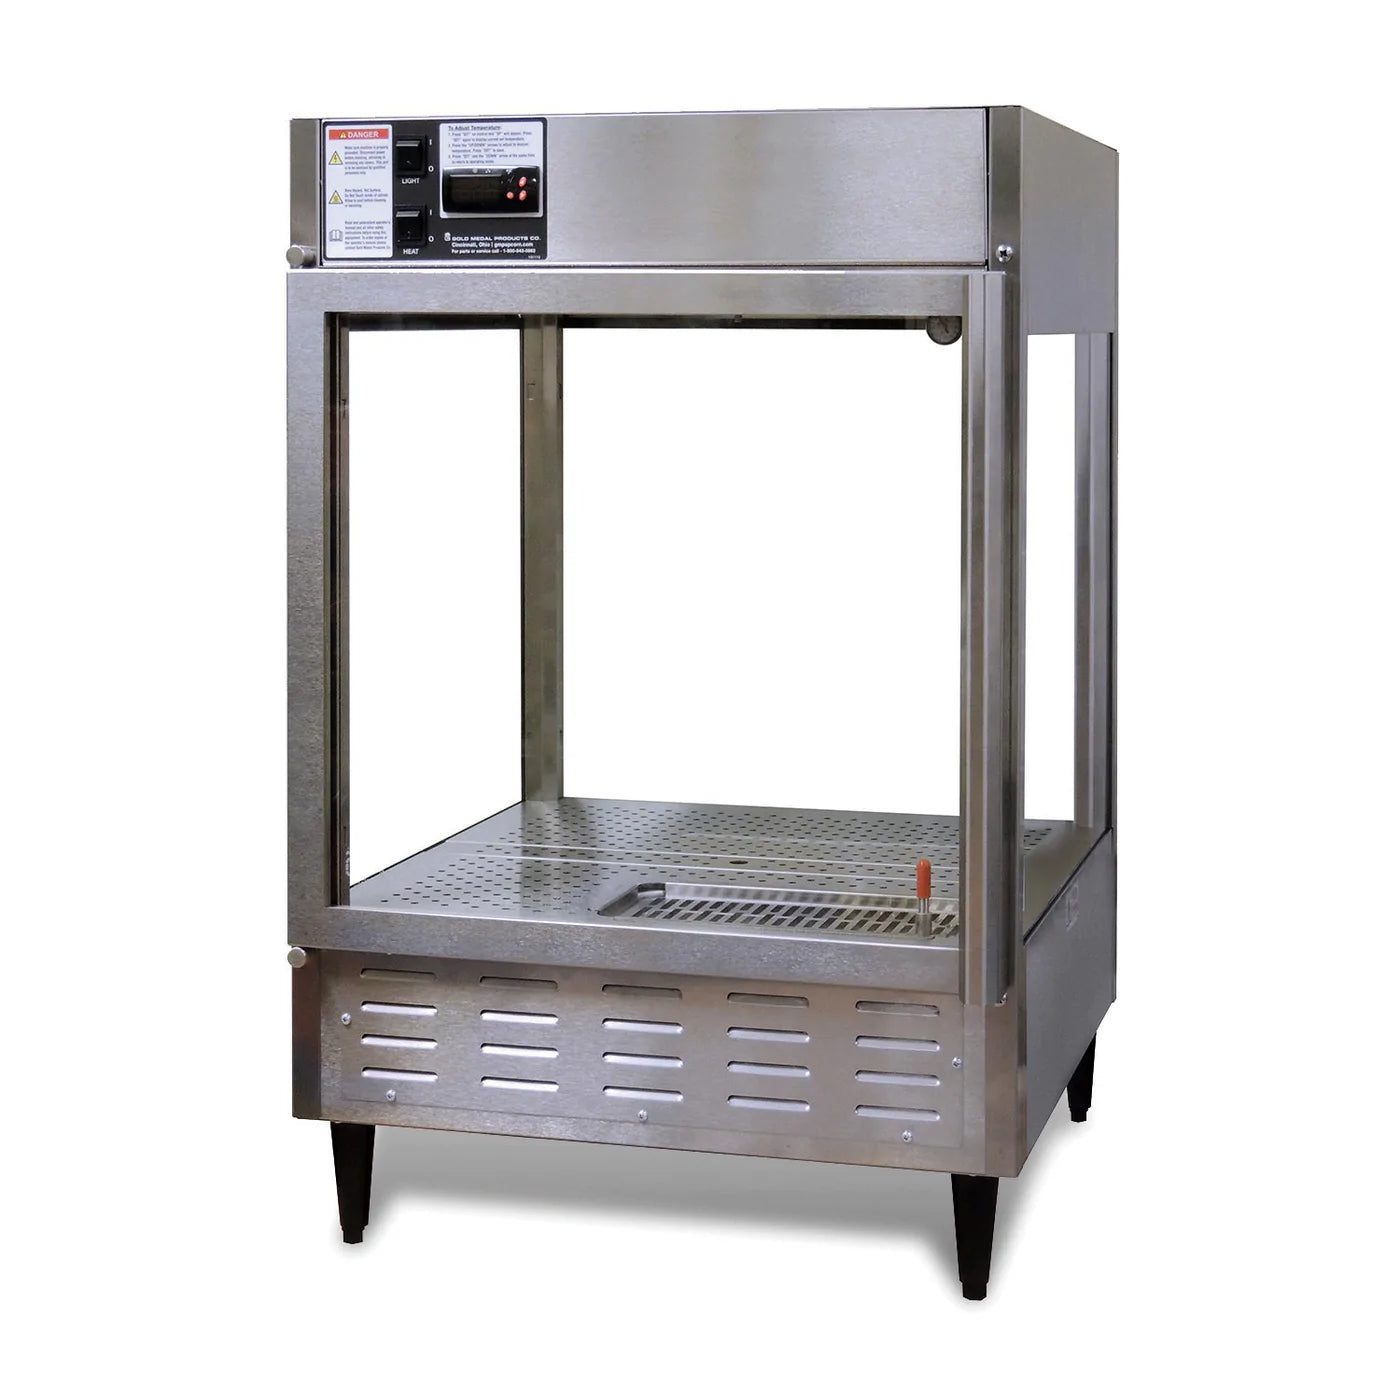 Large Humidified Cabinet